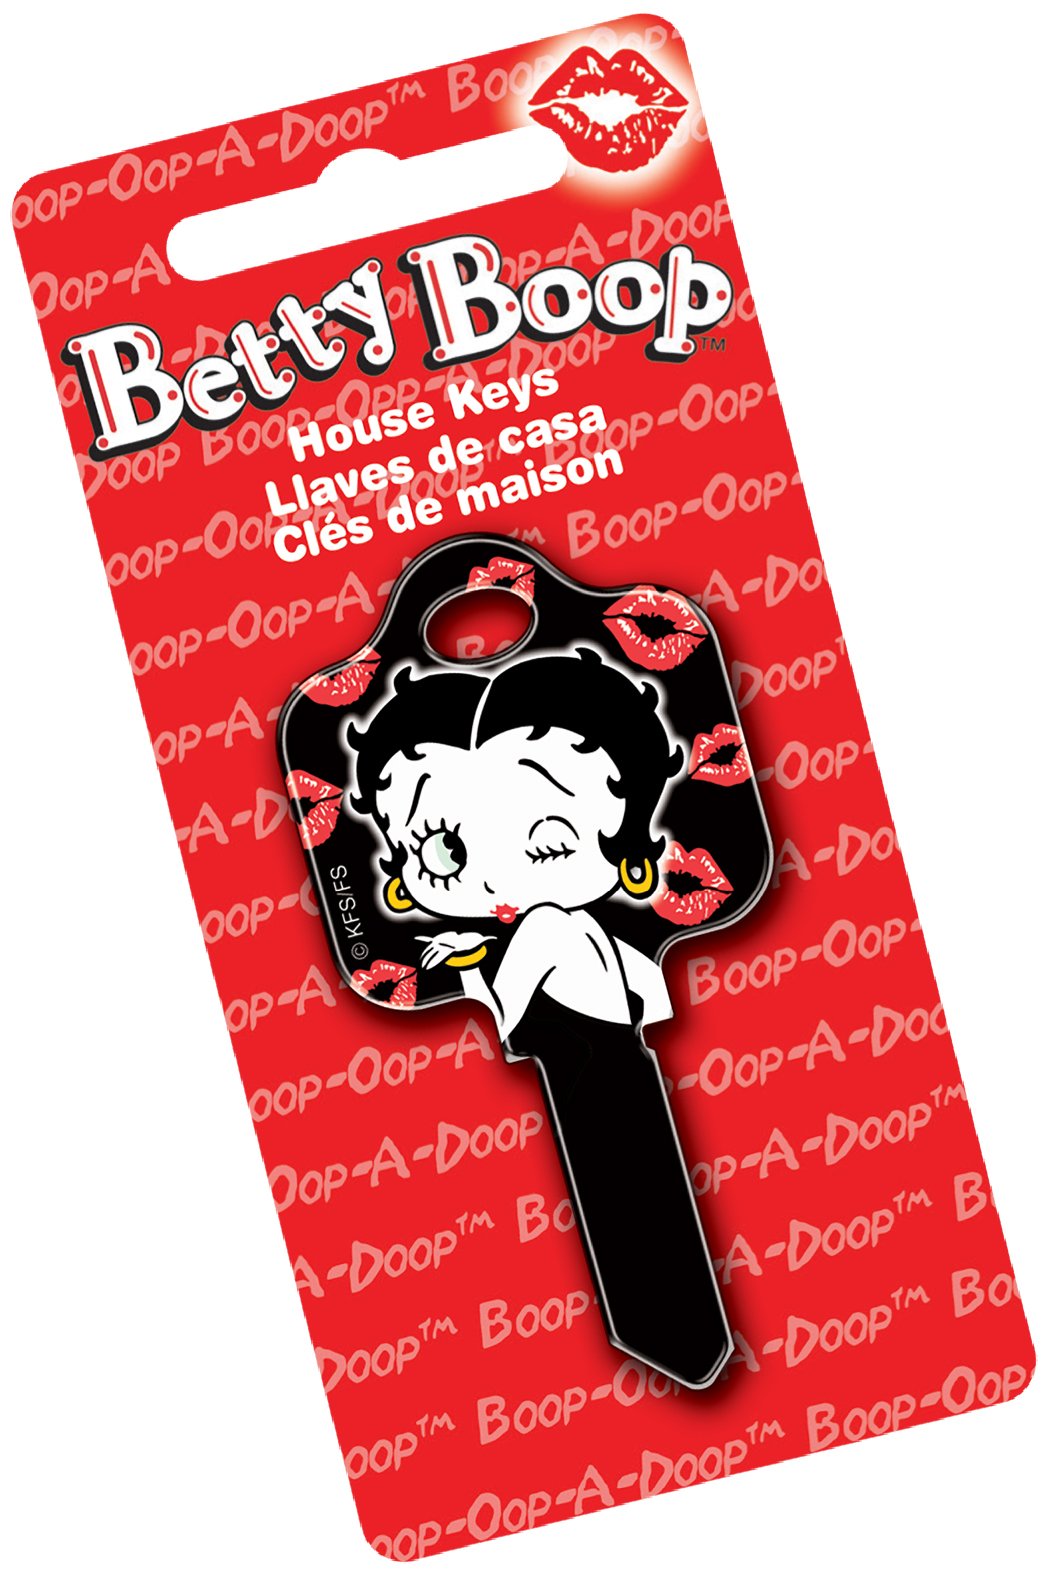 Betty Boop Keyring Brand New Collectable Gift Betty Kisses